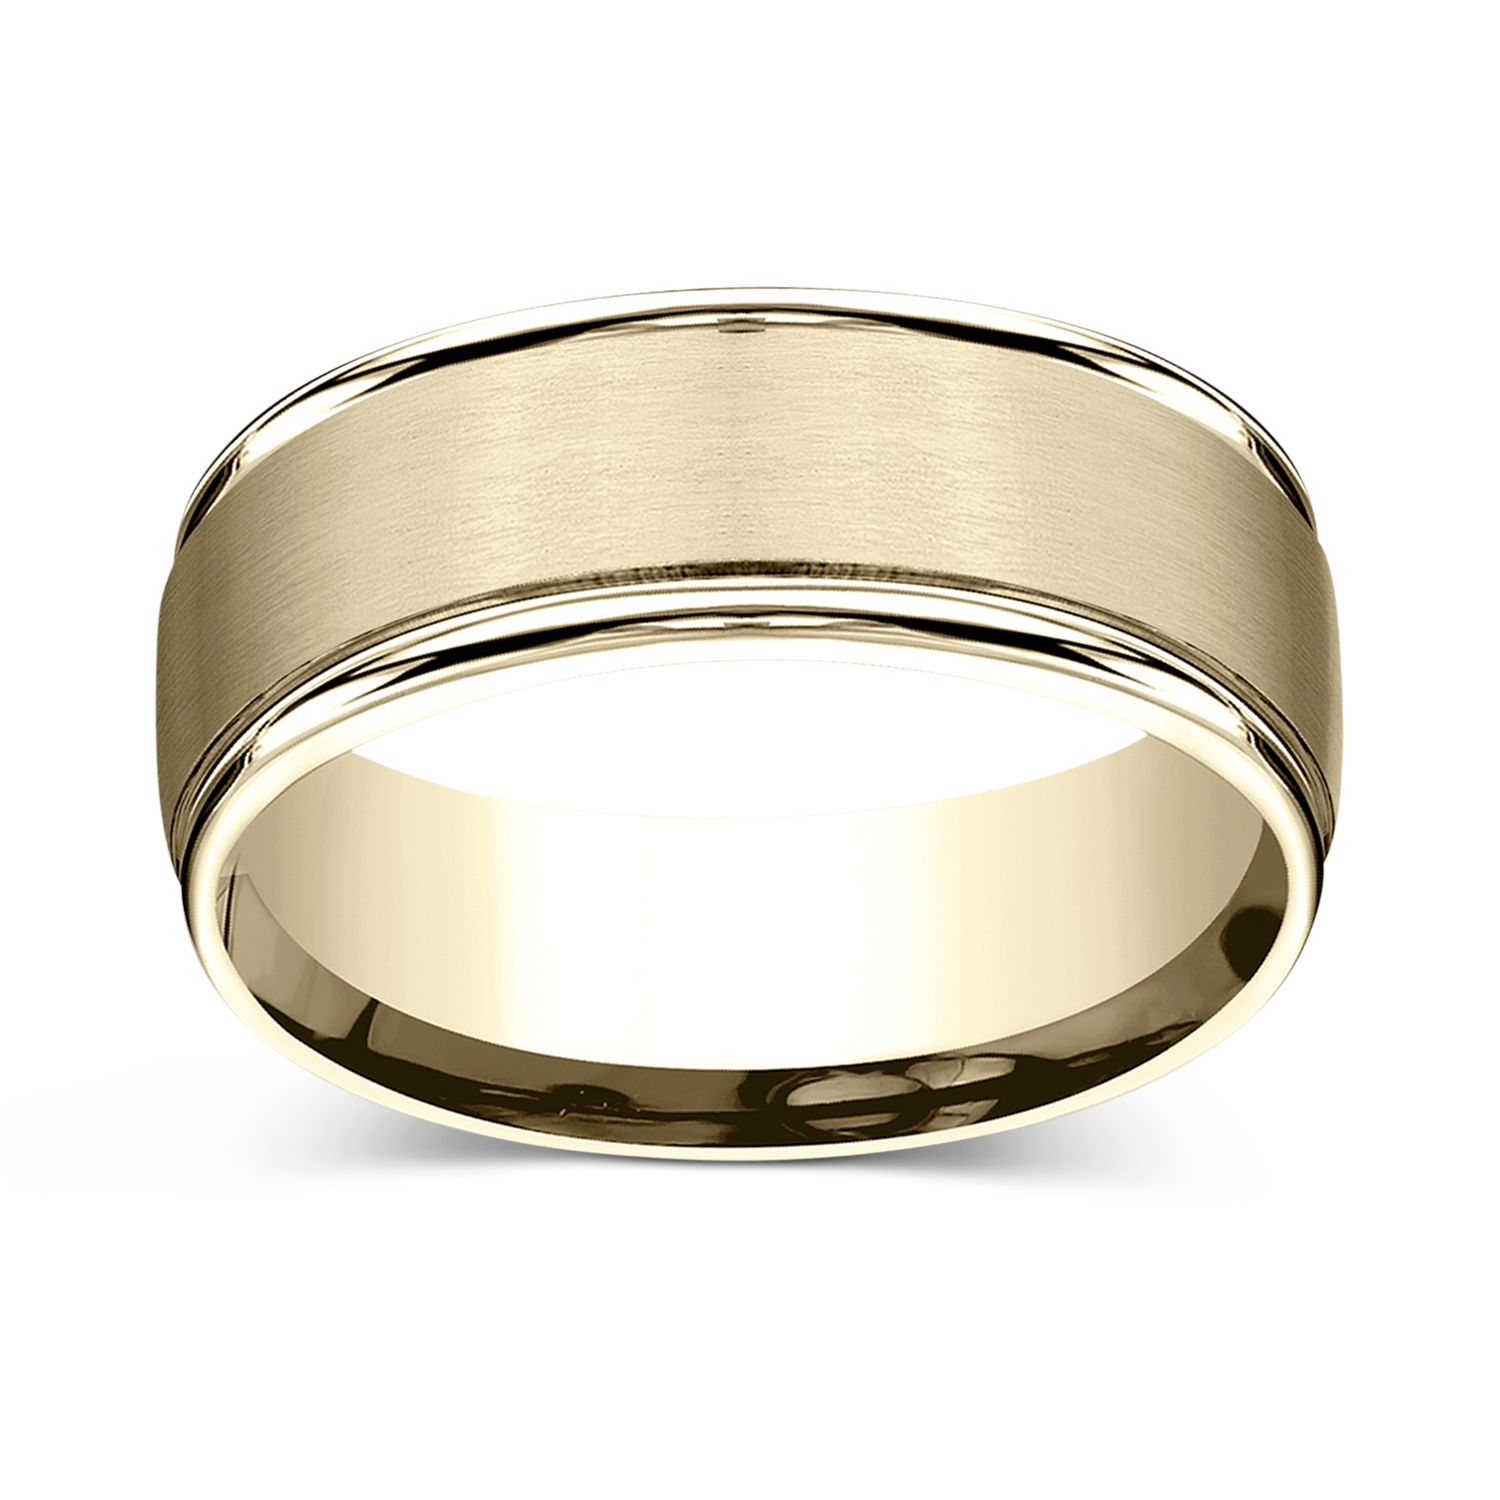 CHARLES & COLVARD: Satin Finish Center With Round Grooved Edges 8.0mm Wedding Band